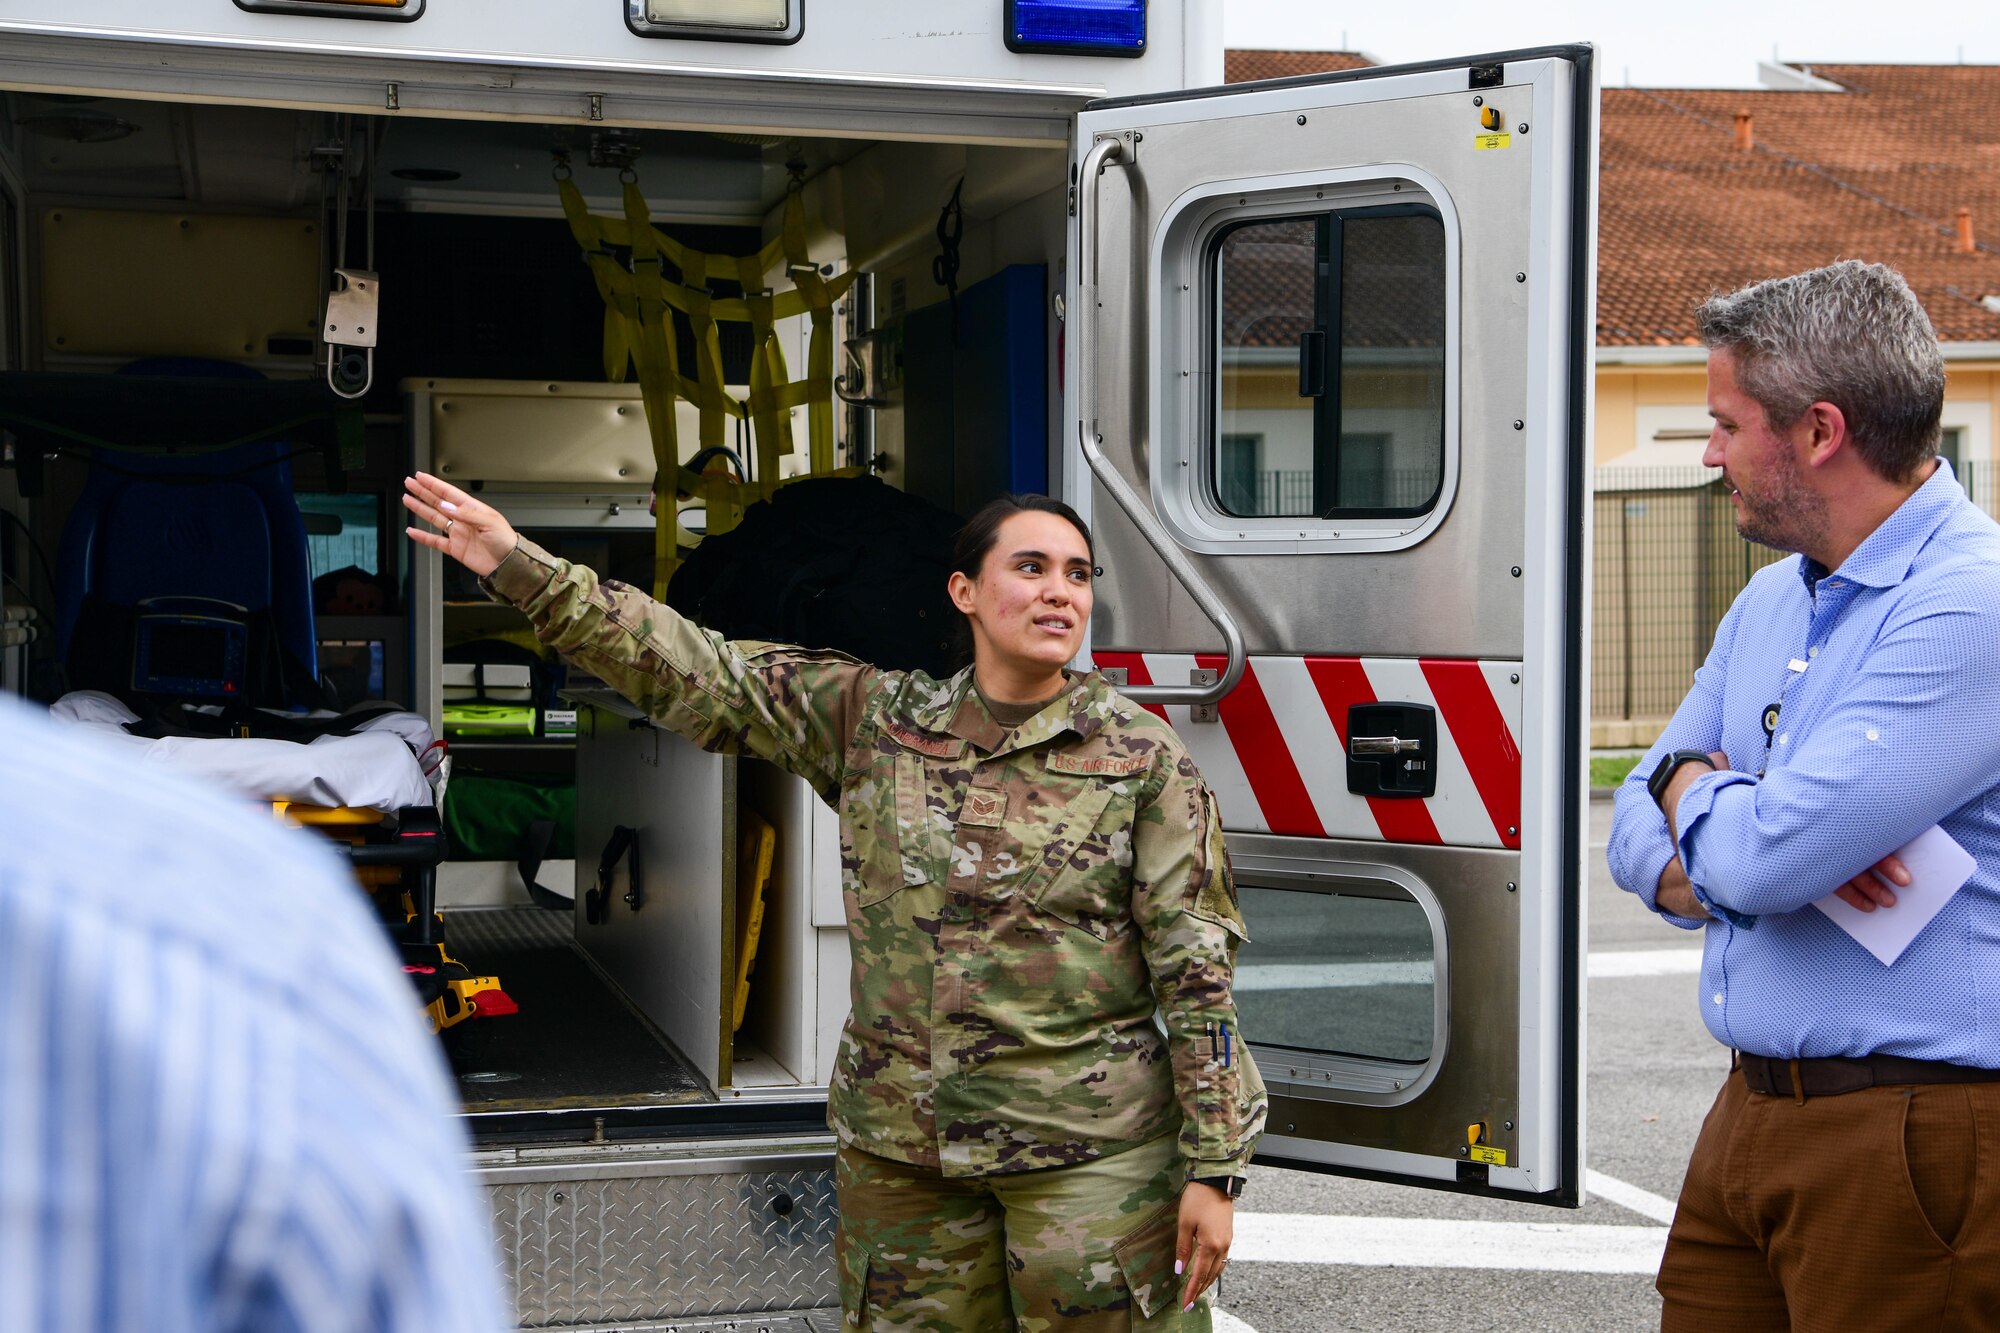 U.S. Air Force Staff Sgt. Kimberly Carranza, 31st Medical Operation Squadron ambulance services technician, left, briefs Italian host nation providers on 31st MDG ambulance services operations at a 31st MDG Open House event at Aviano Air Base, Italy, June 9, 2022. During the event, host nation partners toured different parts of the 31st MDG facilities and learned about the 31st MDG mission: to supply agile trusted care, sustain ready medics and provide a premier patient experience. (U.S. Air Force photo by Senior Airman Brooke Moeder)